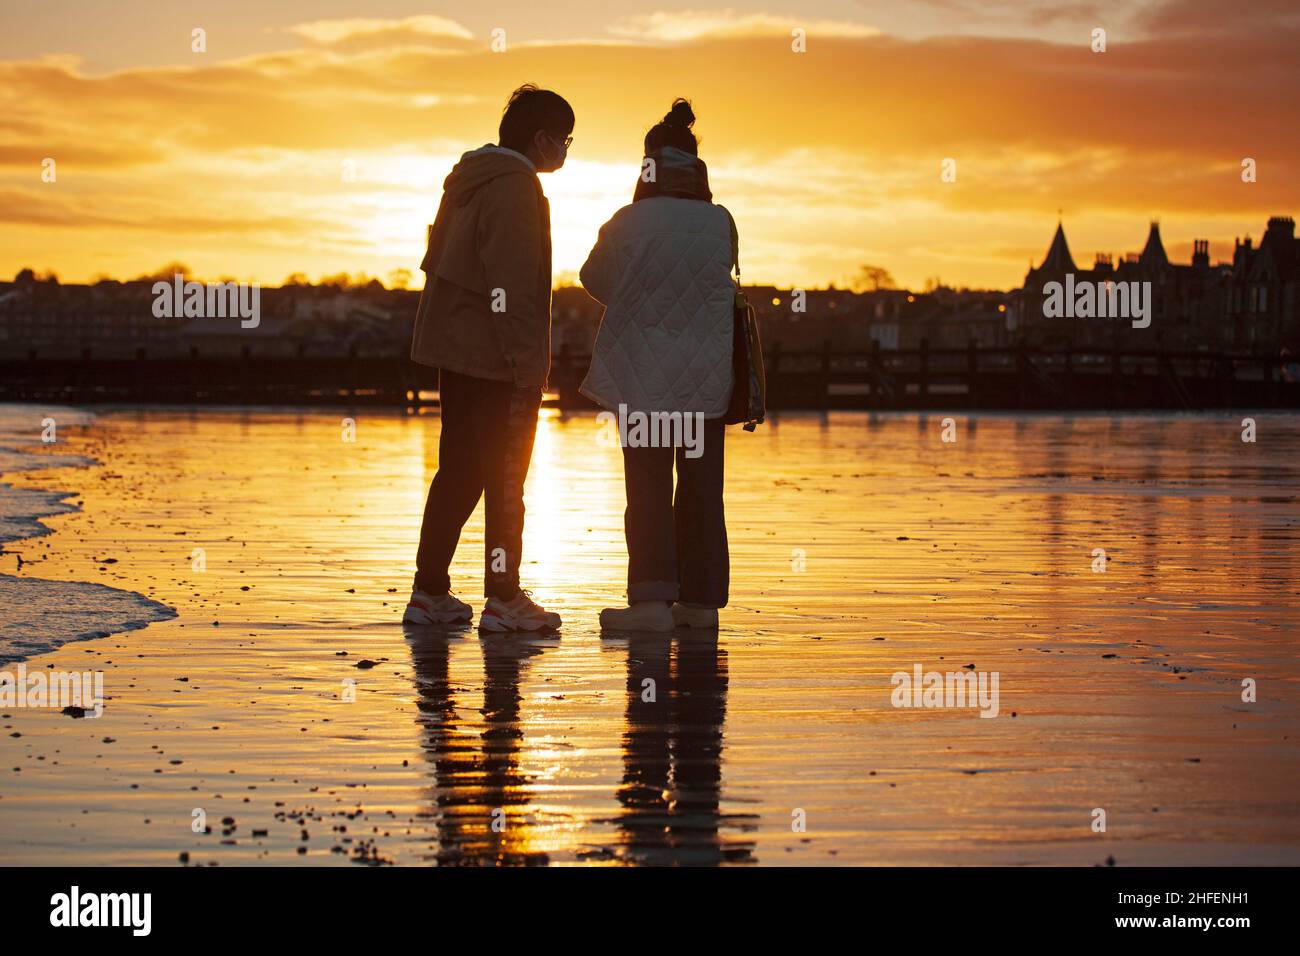 Portobello, Edinburgh, Scotland, UK. 16th January 2022. Finally sunrise sunshine with temperature of 7 degrees after a week of heavy cloud in the skies above the city. Pictured: Asian tourists enjoy the calm atmosphere at the seaside. Credit: Scottishcreative/Alamy Live News. Stock Photo